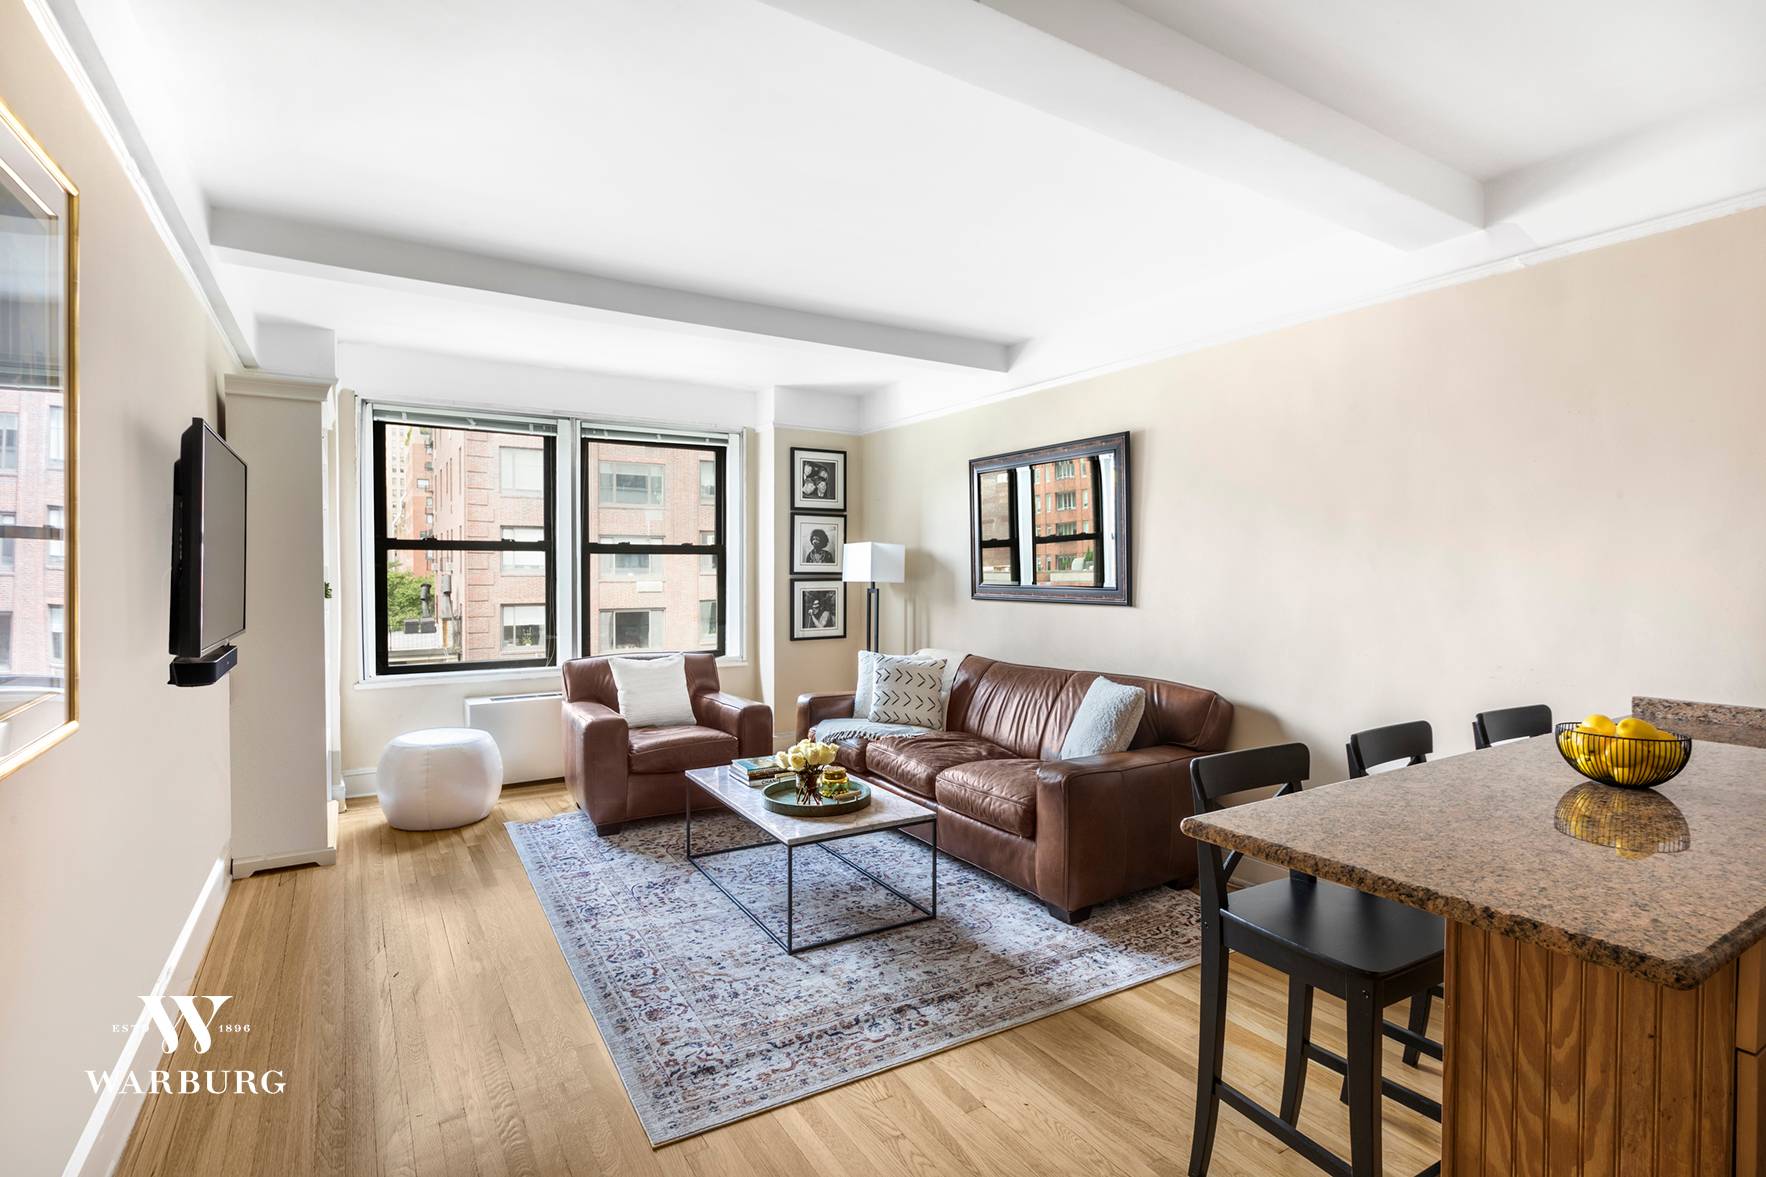 Move right into this lovely 1 bedroom prewar cooperative in the heart of the Upper East Side.